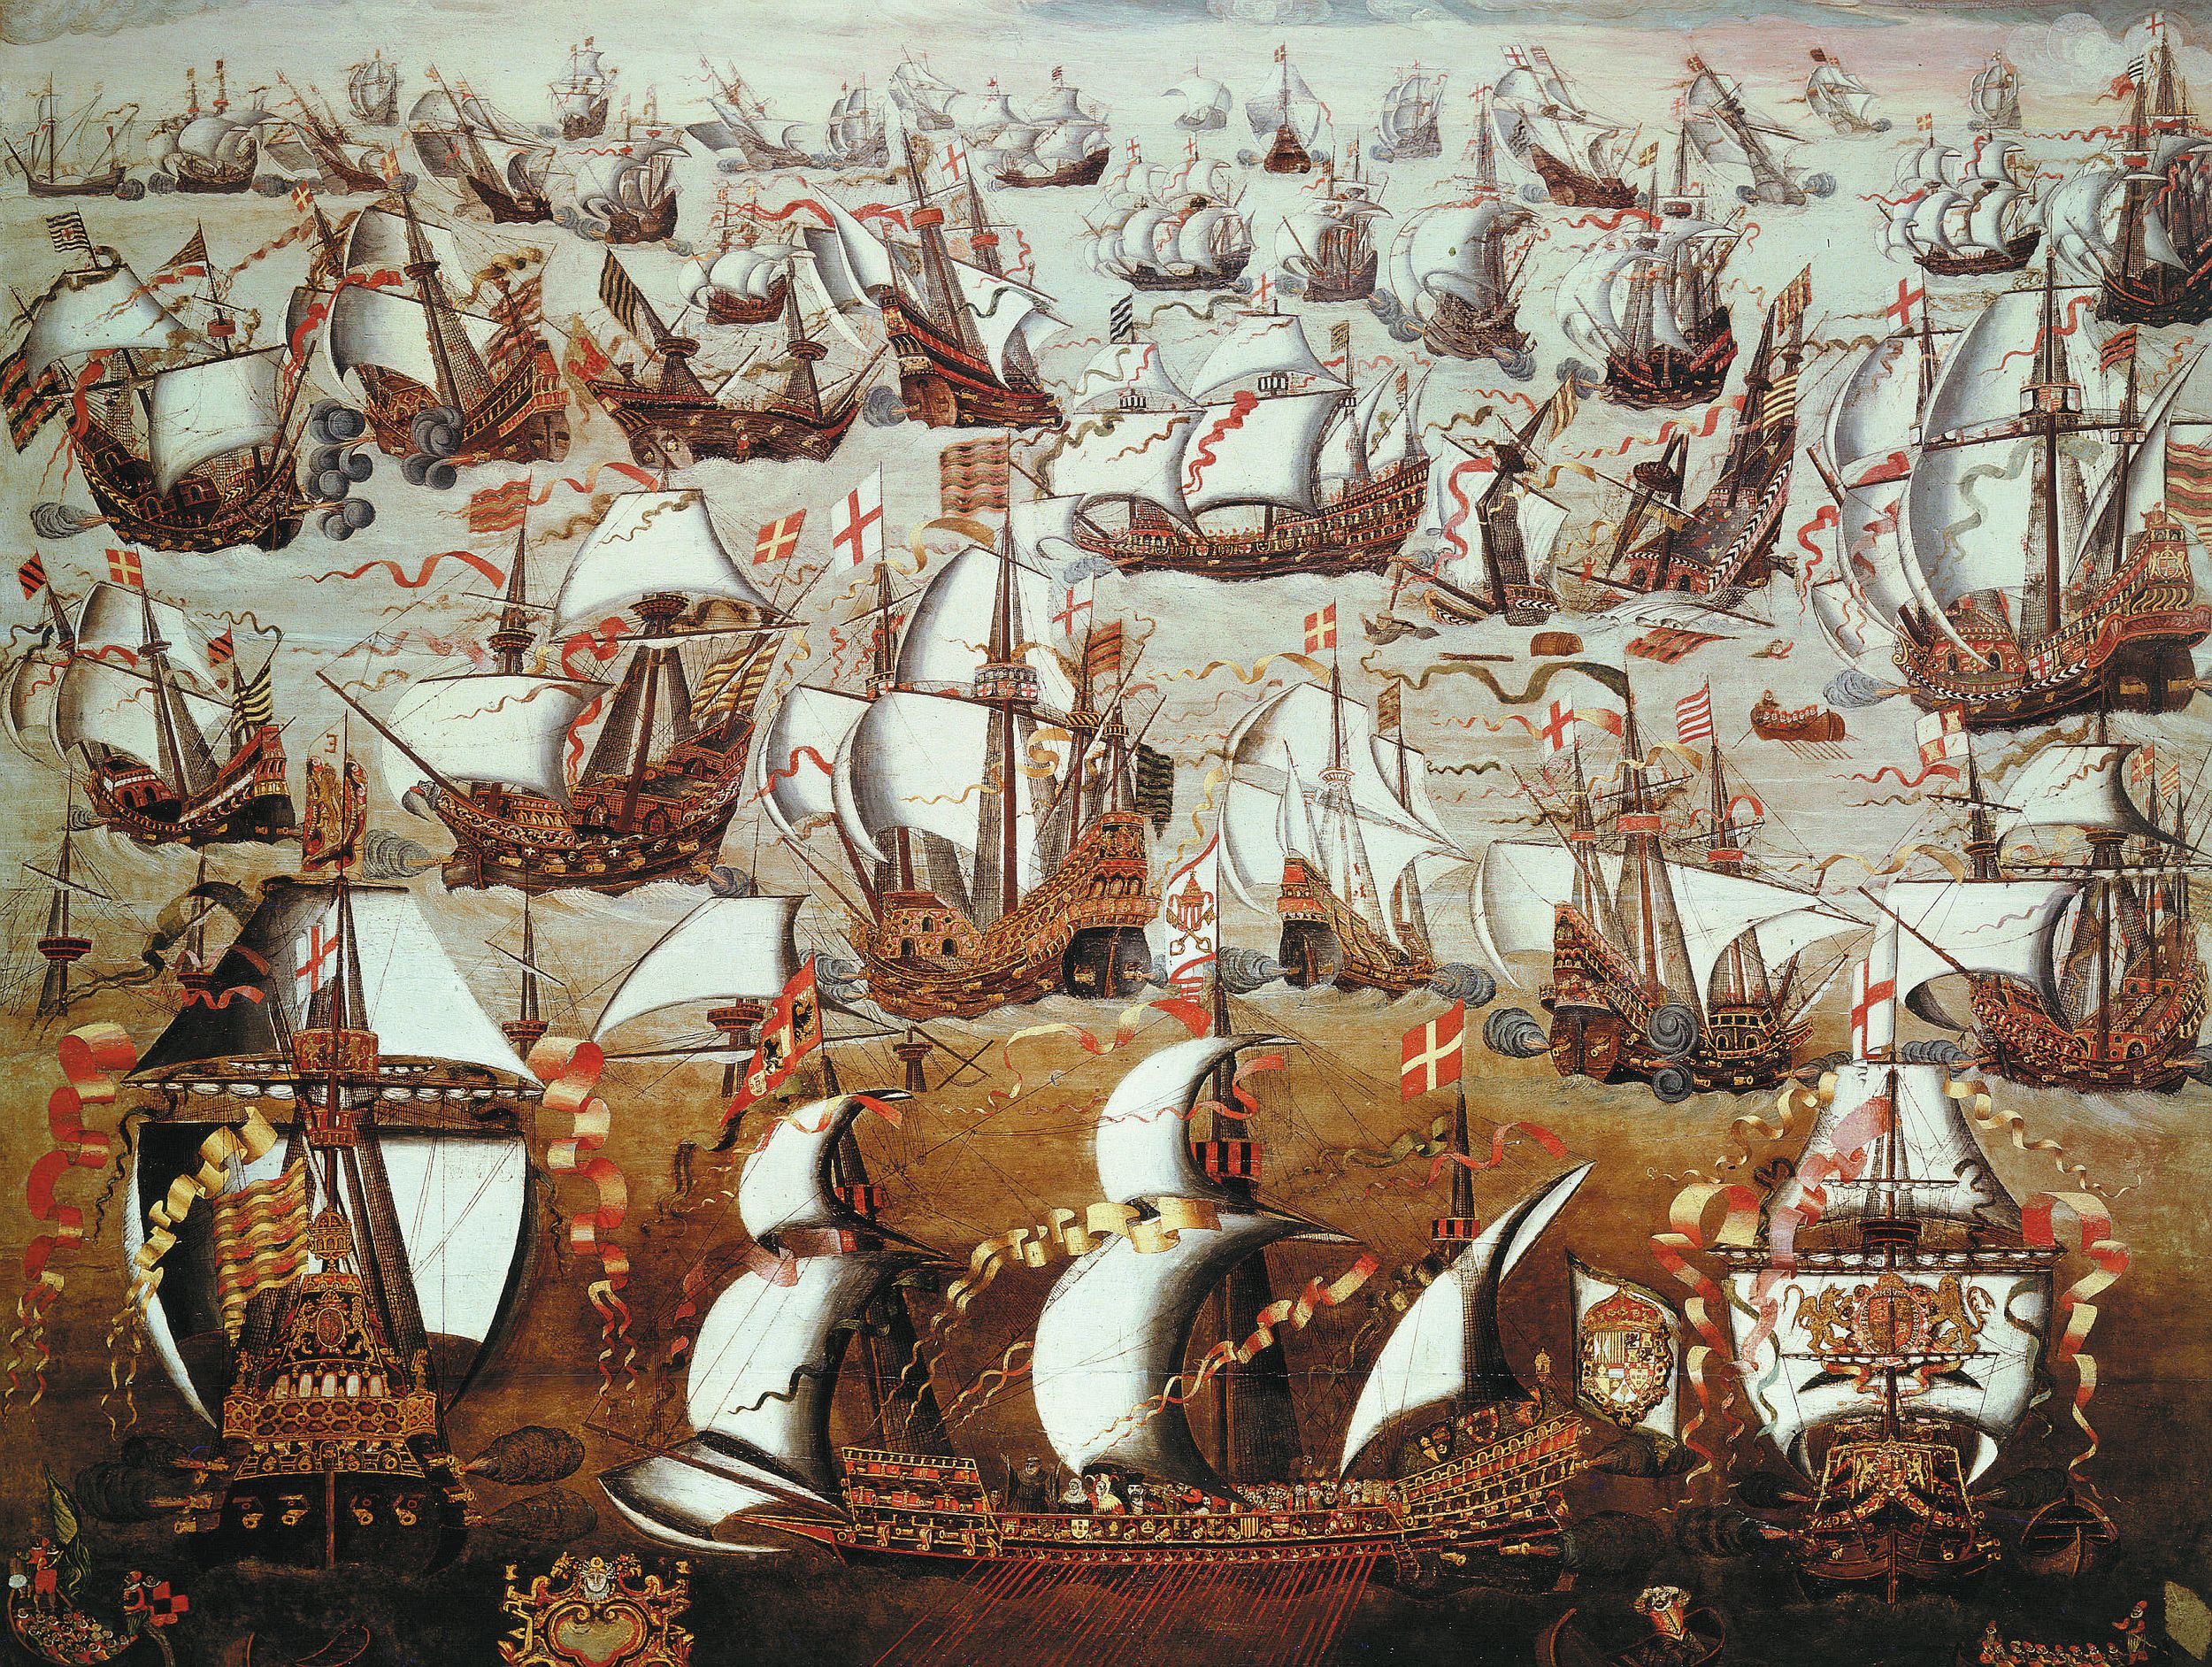 The Armada that left Spain in the spring of 1588 numbered an astonishing 130 vessels, 8,000 sailors, and 20,000 soldiers. It was still not enough to defeat the brilliantly led English fleet, bad weather, and bad luck. 